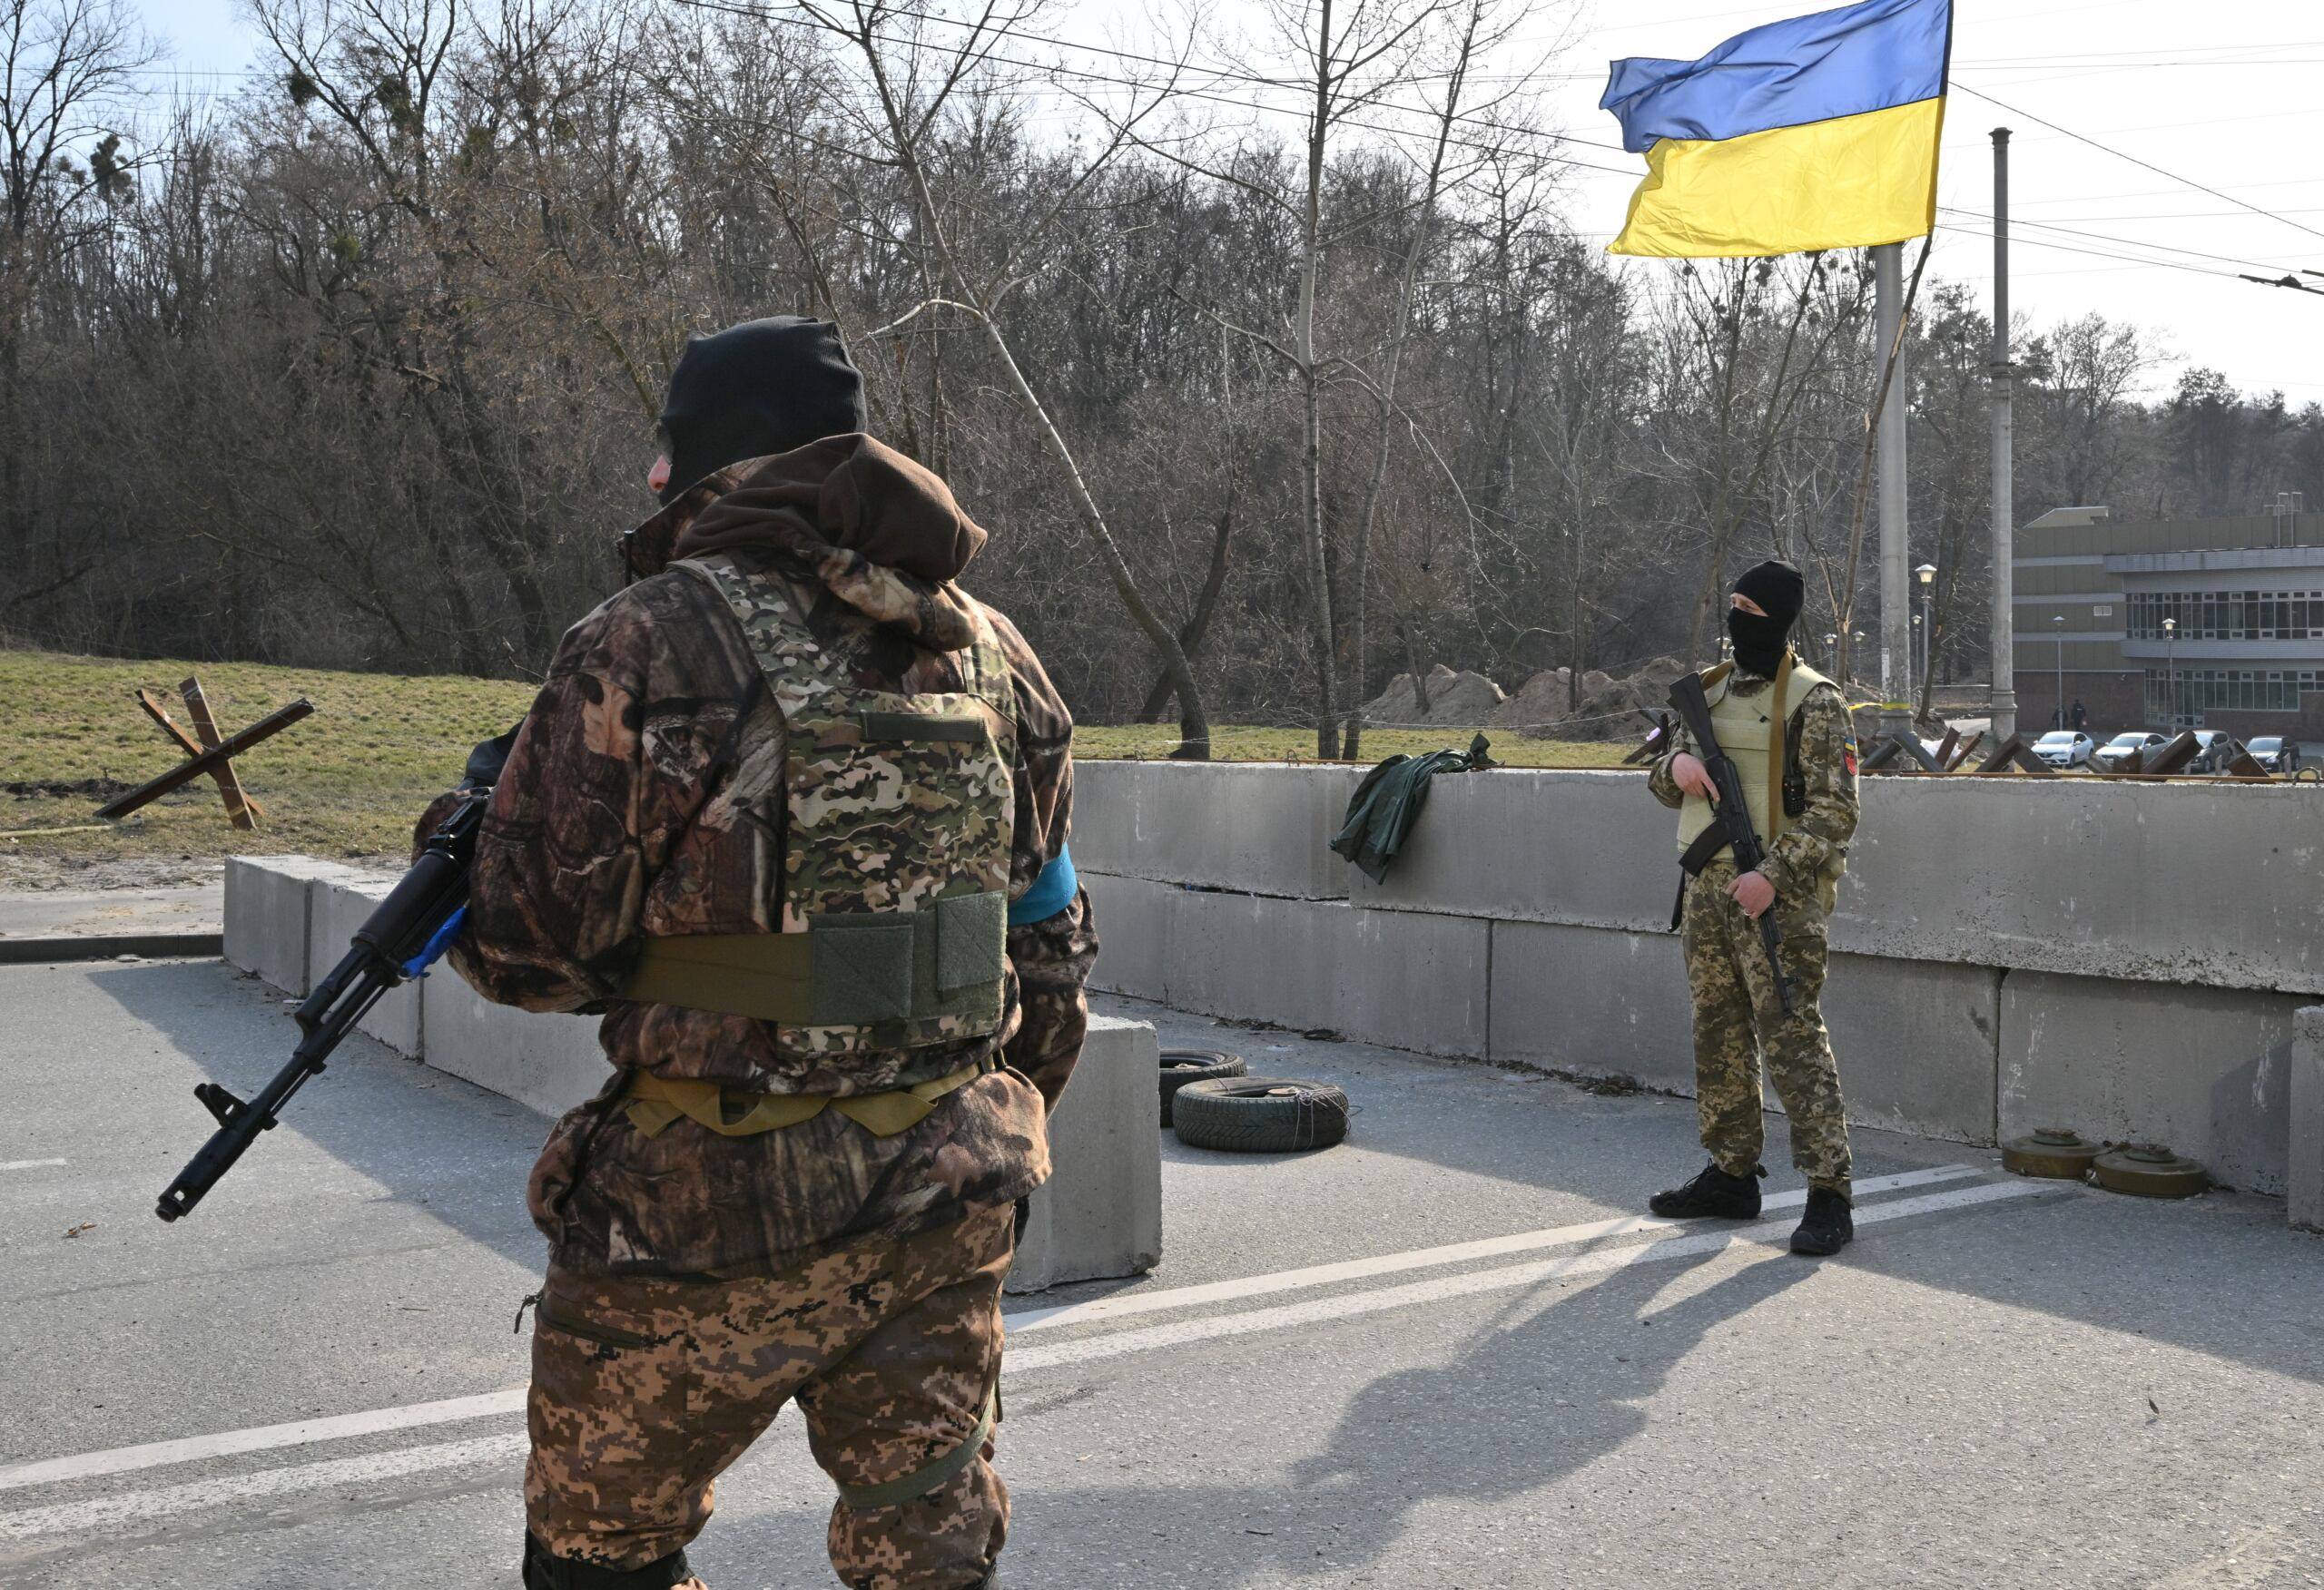 Ukrainian soldiers stand guard at a checkpoint in the outskirt of Kyiv on March 28, 2022. (Photo by Sergei SUPINSKY / AFP)